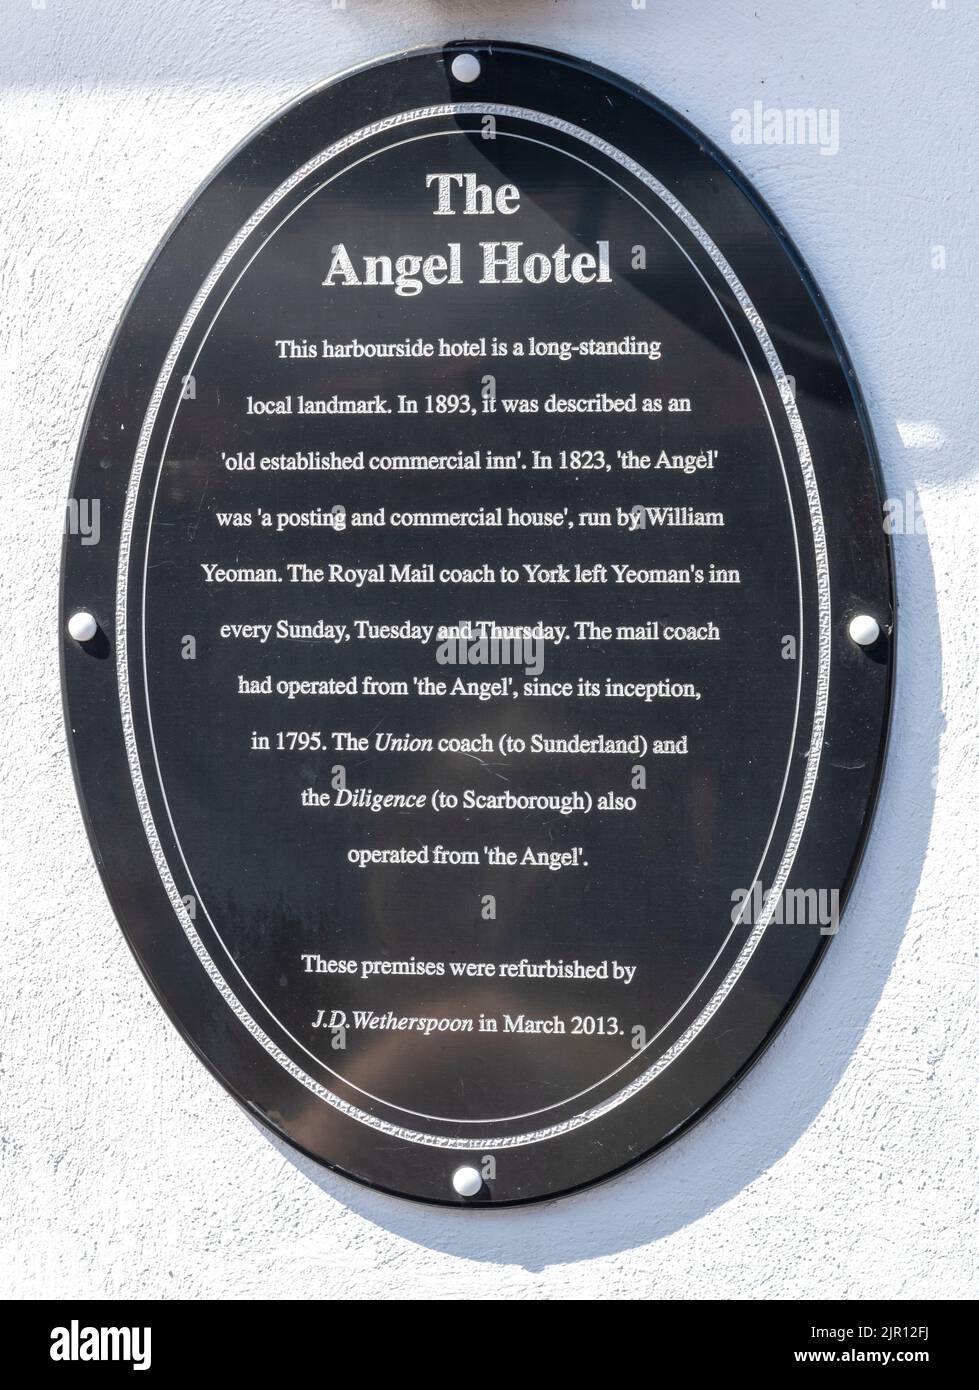 Heritage plaque at The Angel Hotel - Wetherspoon public house - New Quay Road, Whitby, North Yorkshire, Yorkshire, England, UK Stock Photo